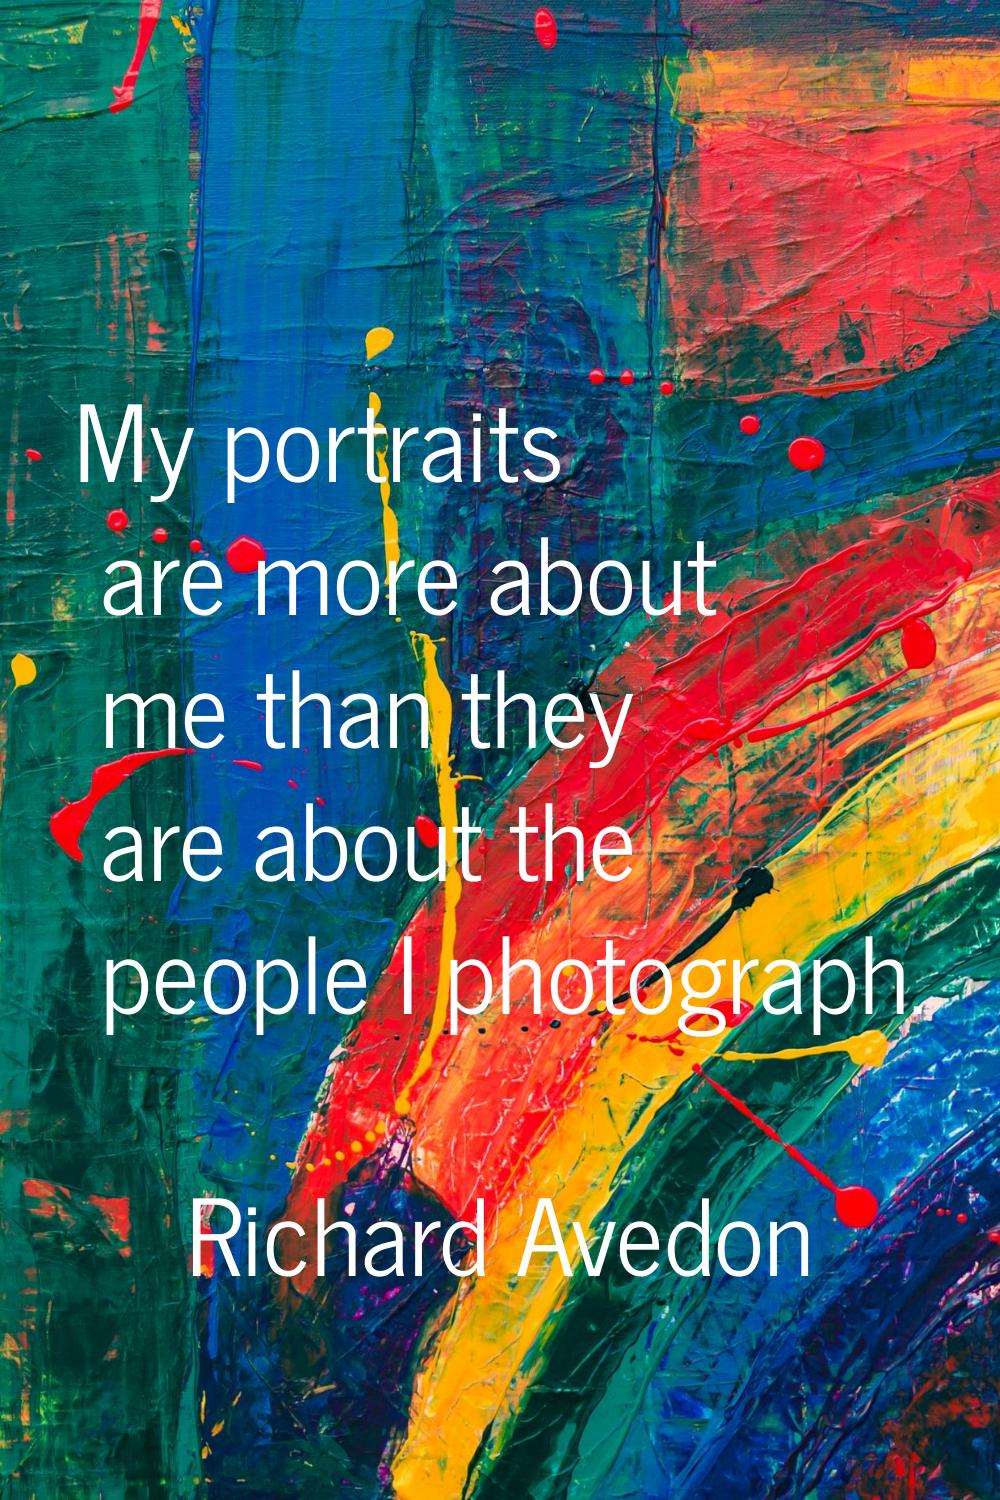 My portraits are more about me than they are about the people I photograph.